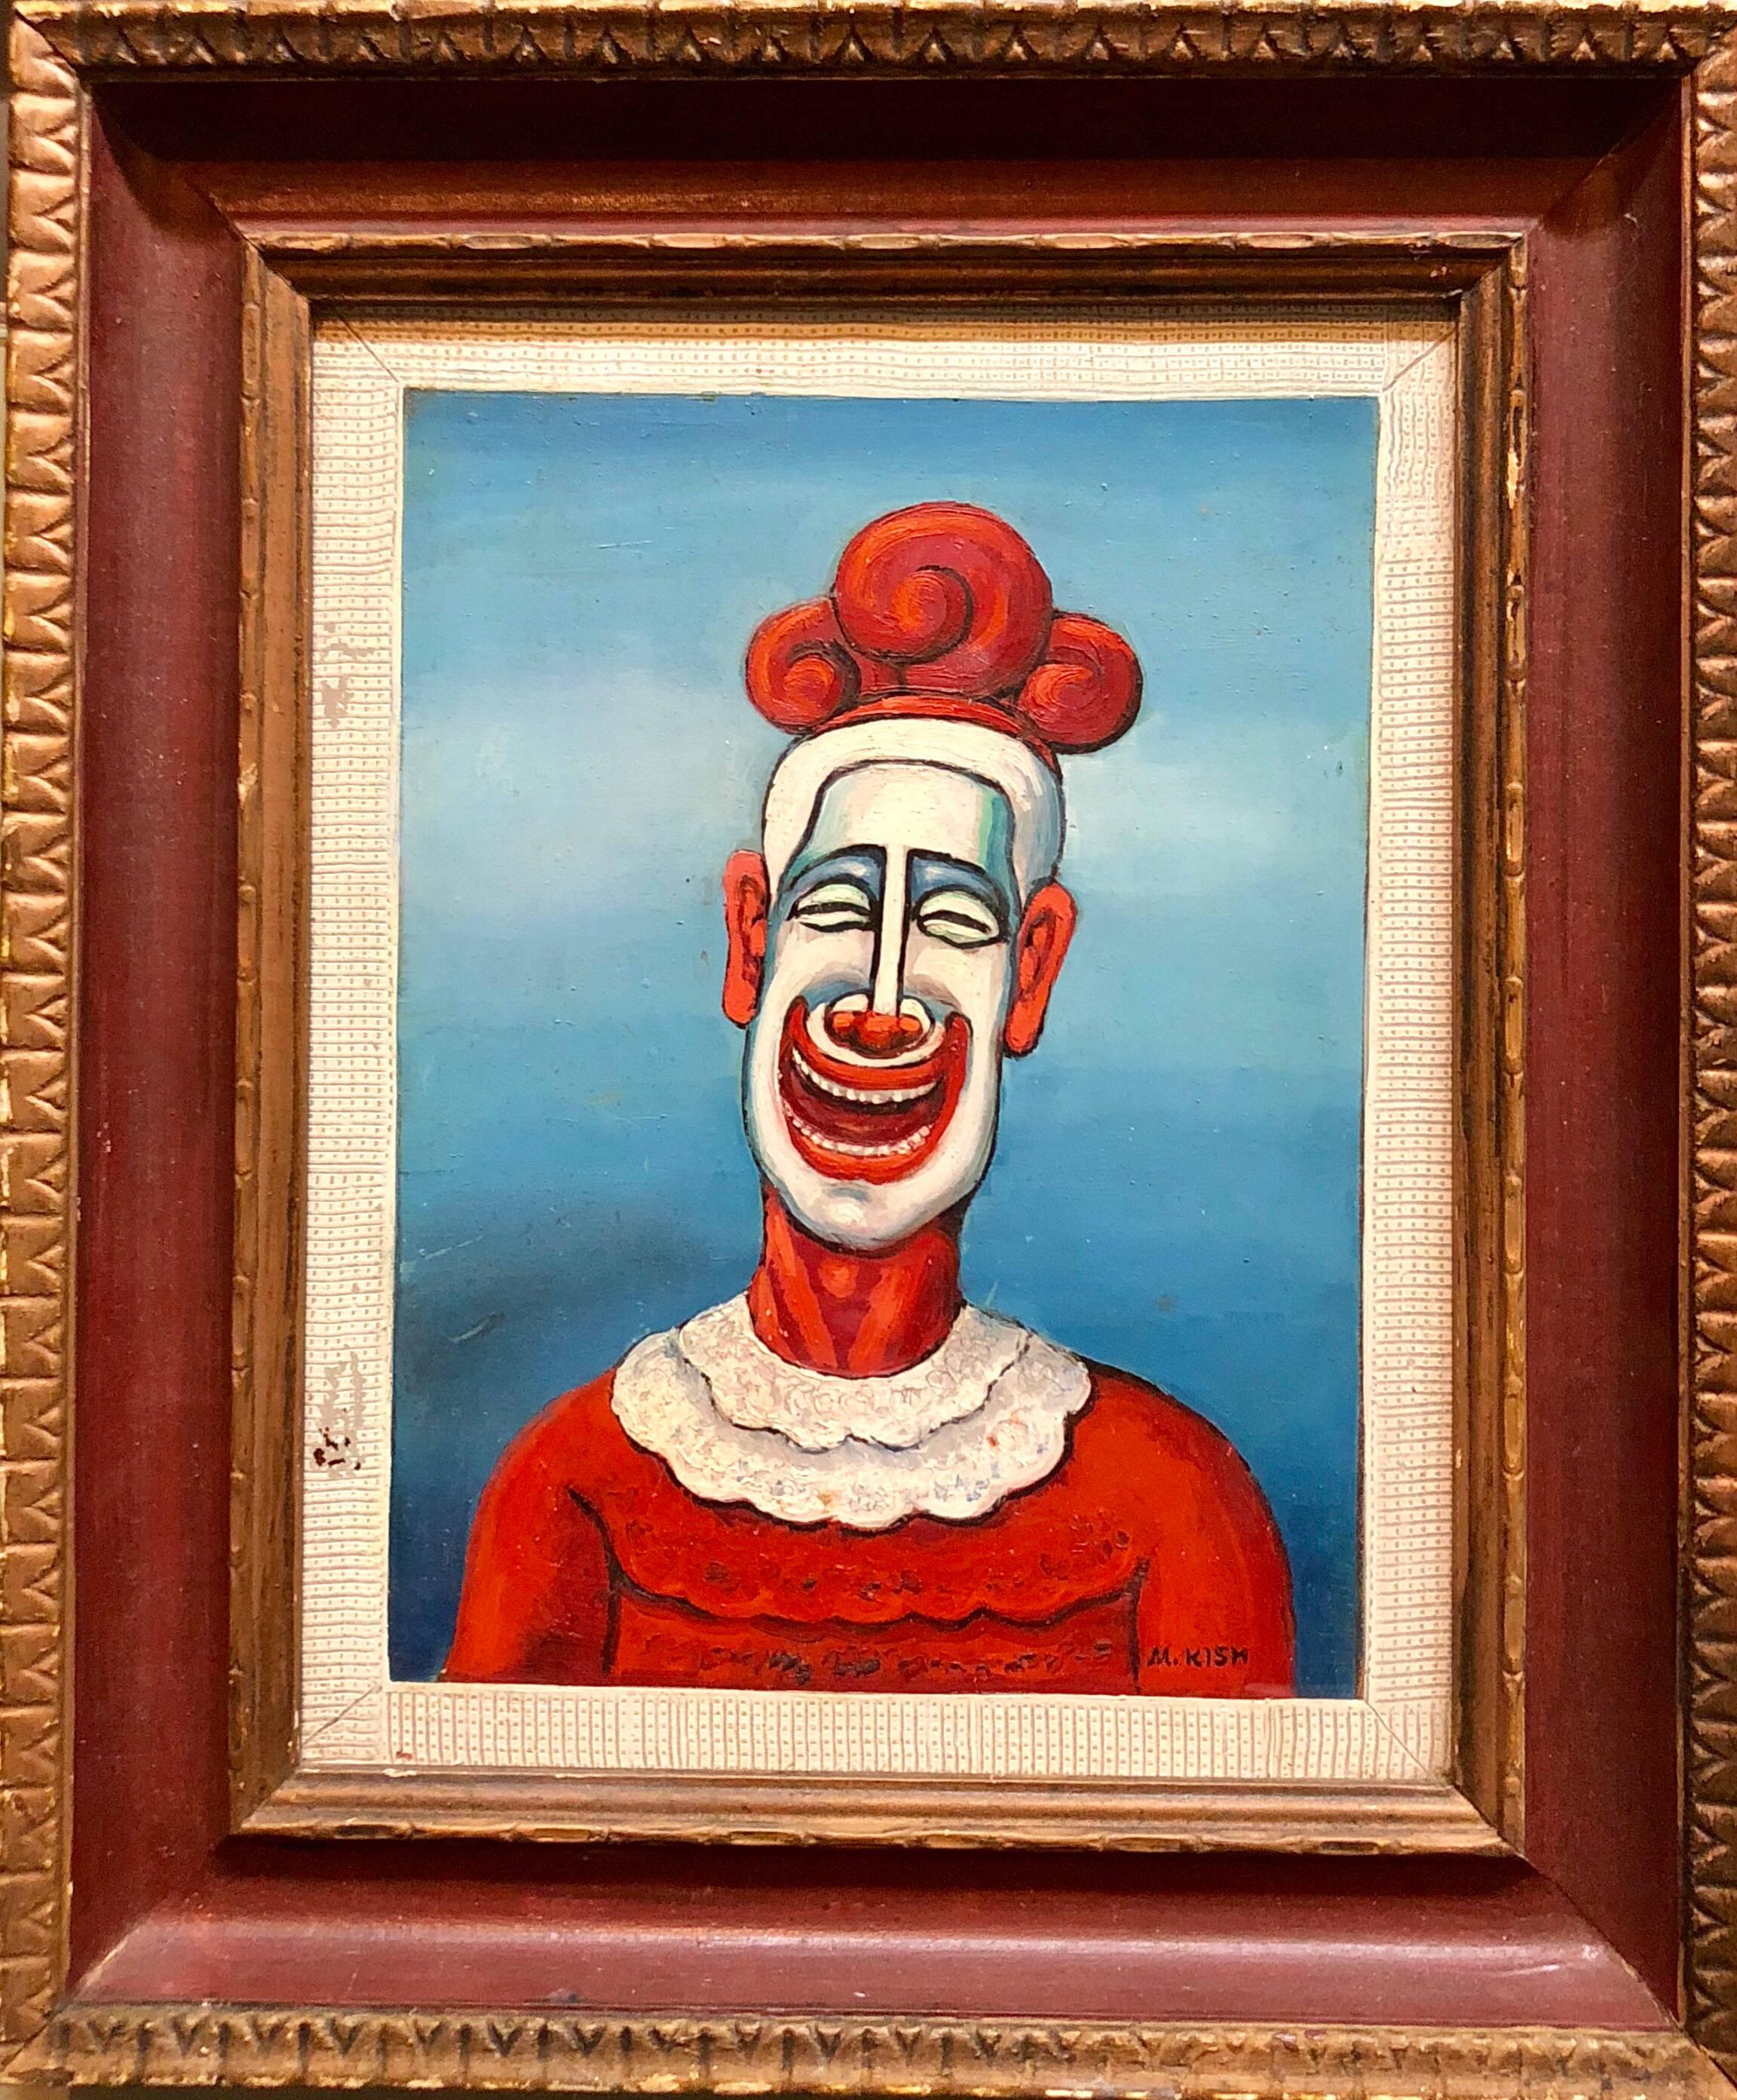 This portrait of a clown by Maurice Kish is part from a series of carnival figures, circus clowns and carousel horses and riders that he did in the 30s and 40s. The artist uses a vibrant color palette and controlled brushstrokes to depict the